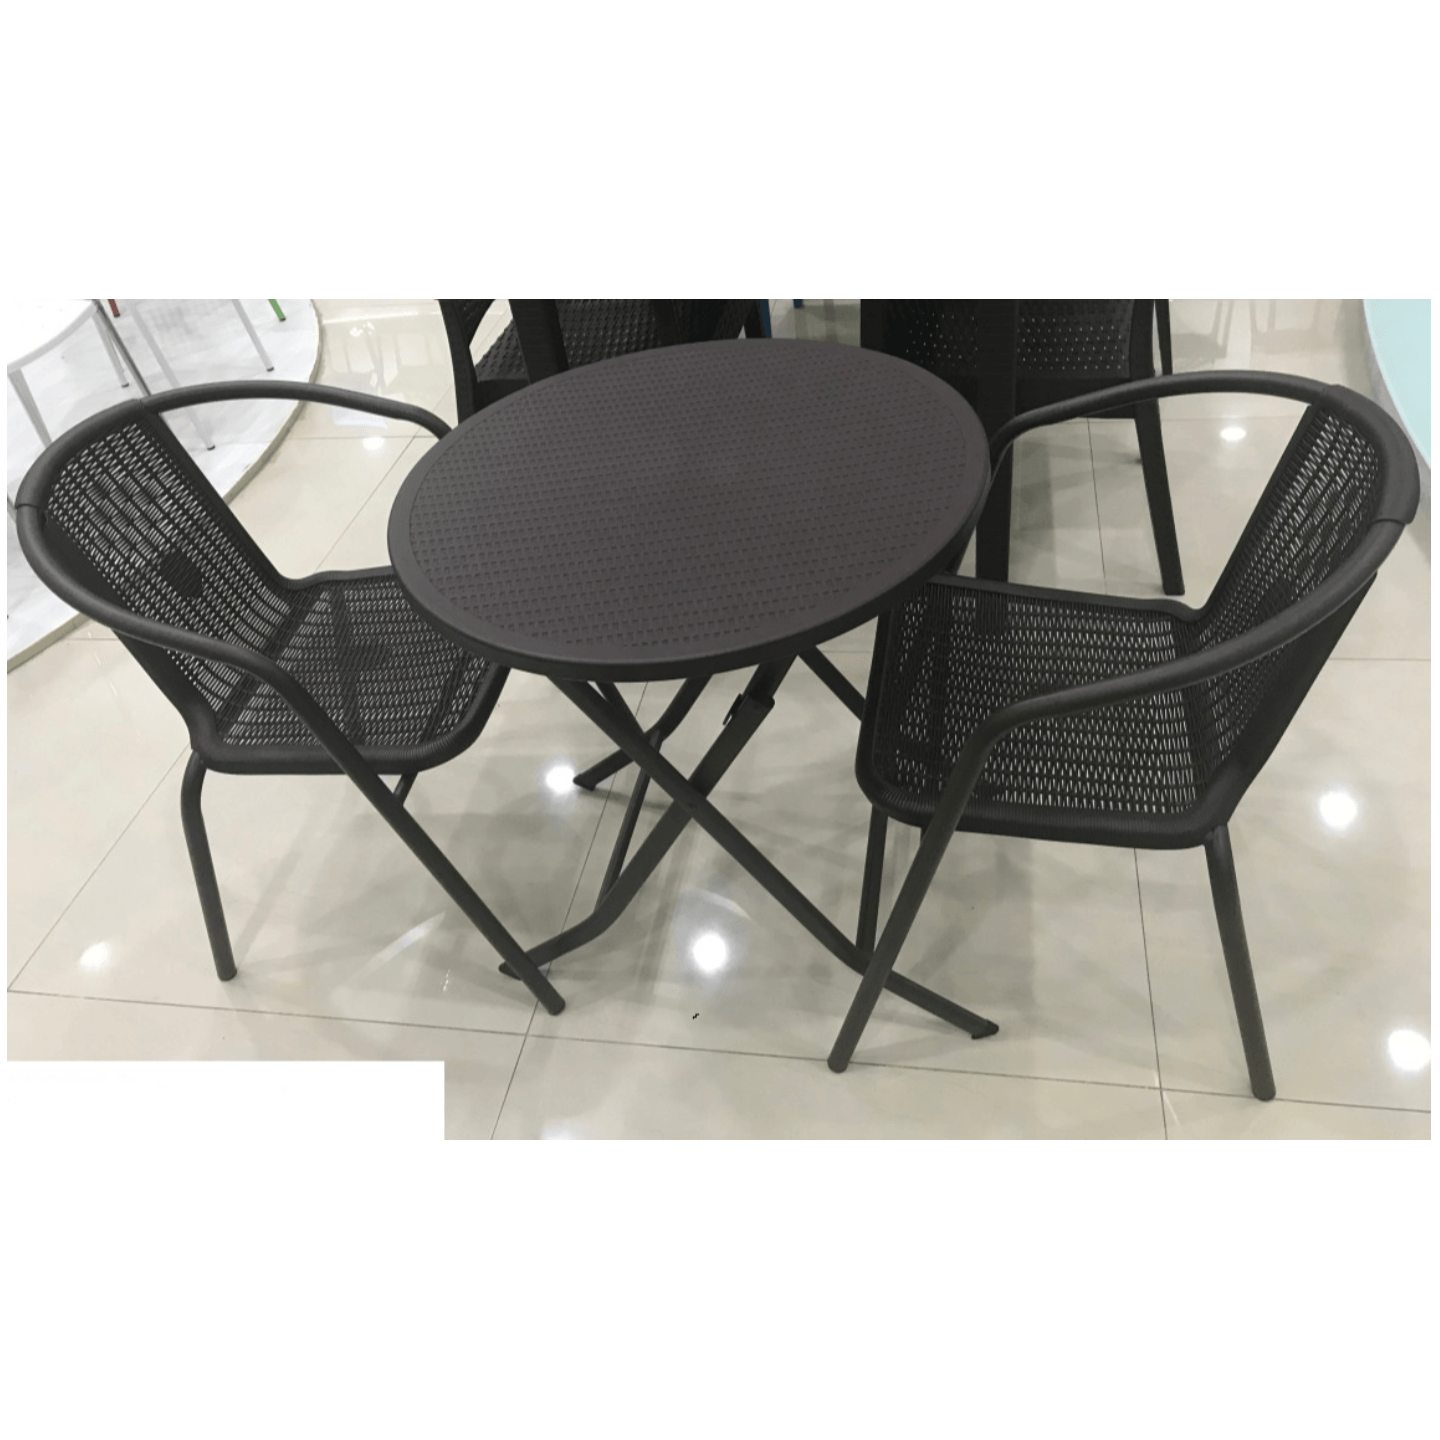 IHM  Outdoor Dining Table 10/9139 Two Seater in Brown Colour